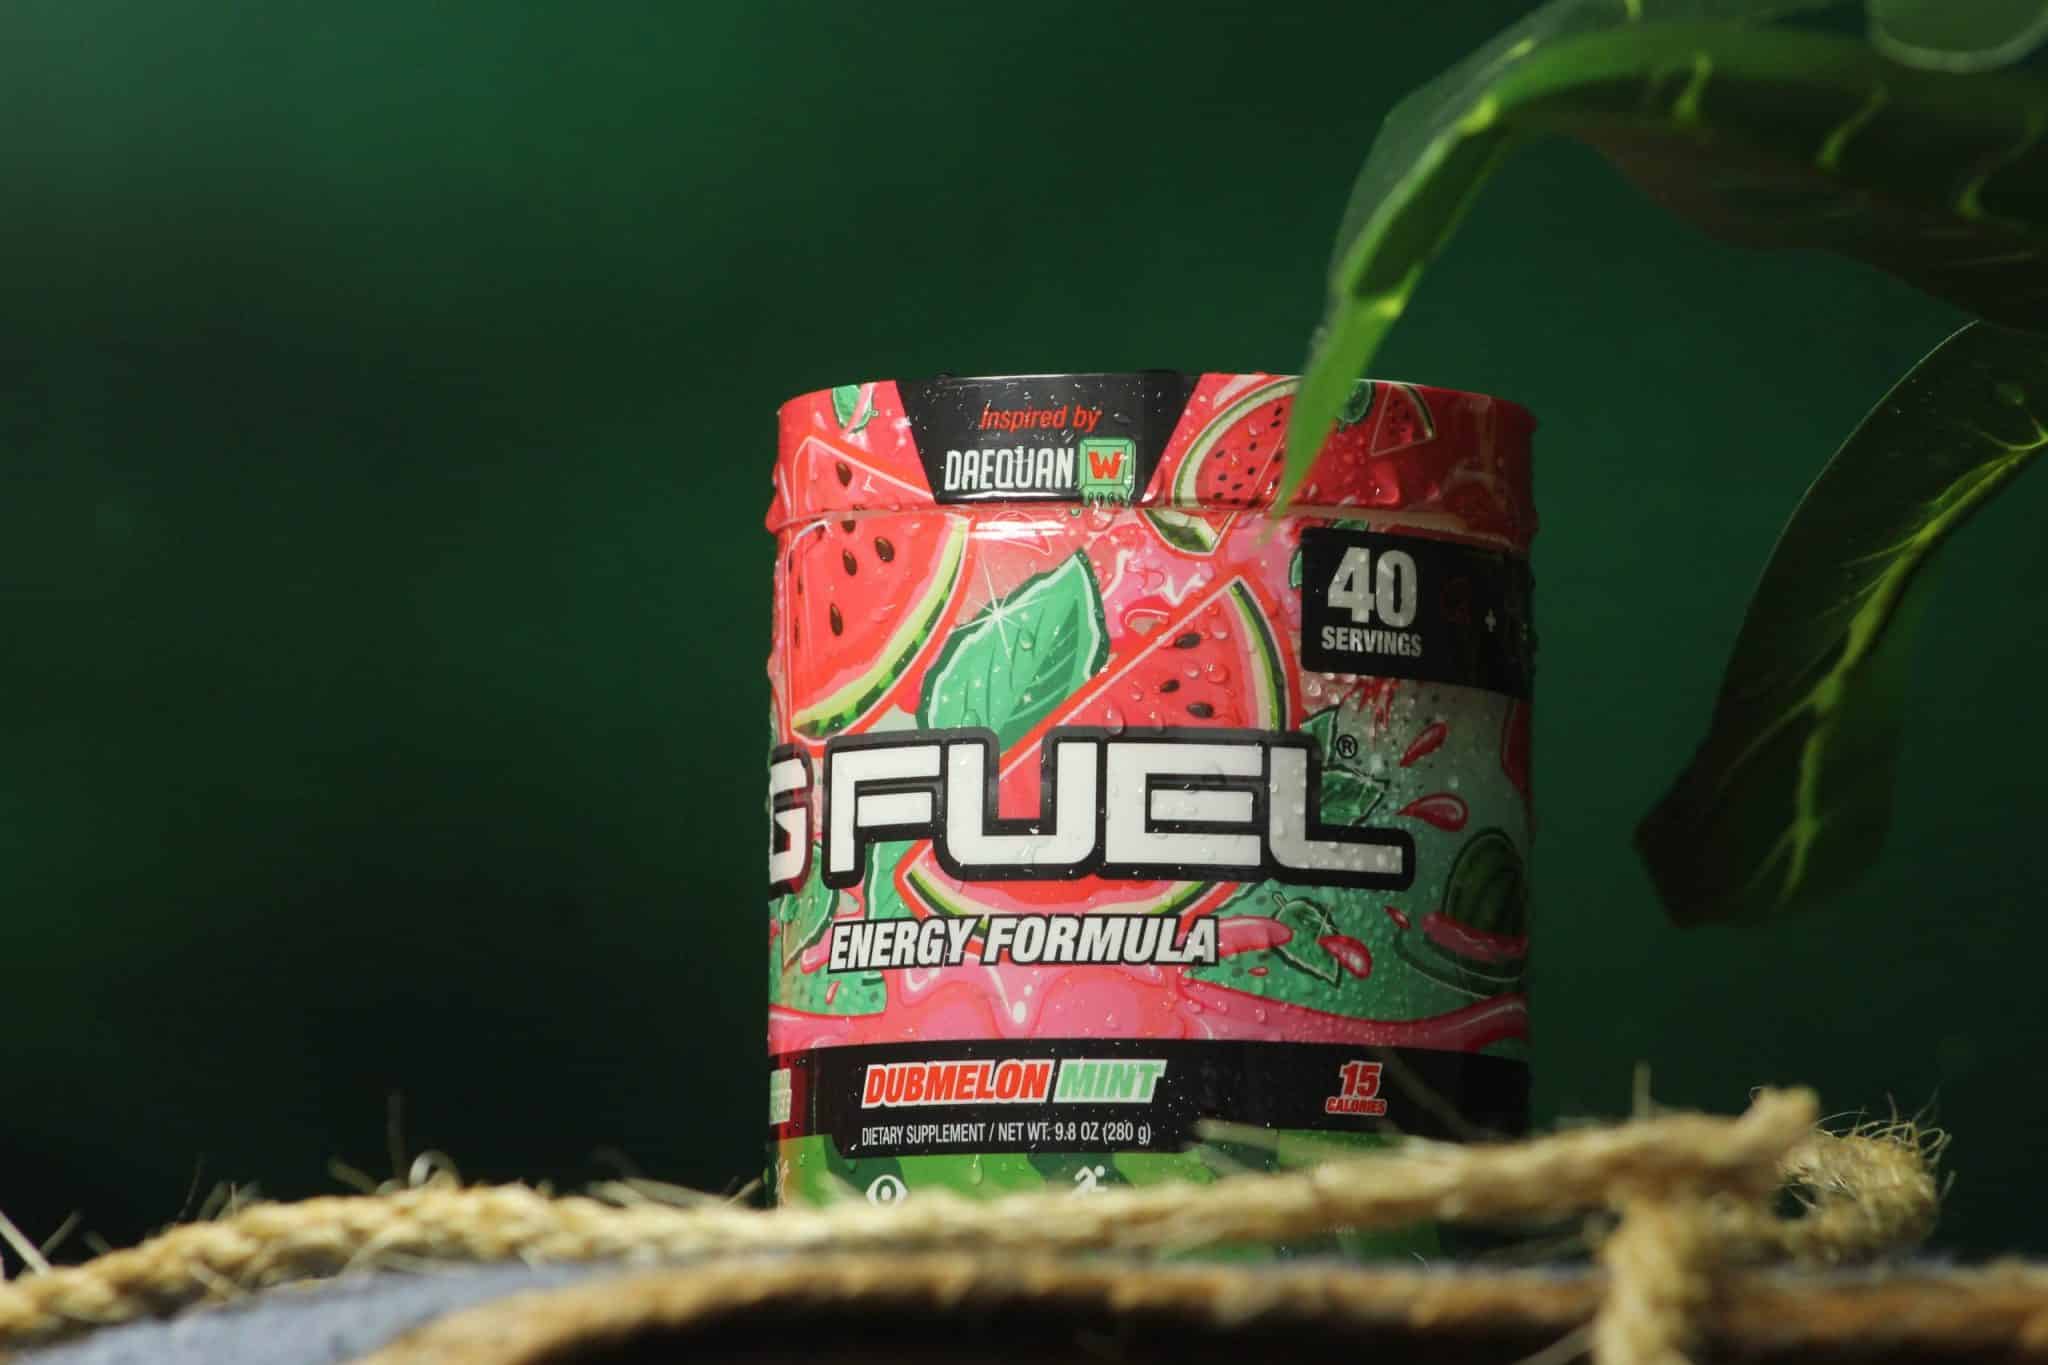 How To Get G Fuel Orders Shipped To Australia